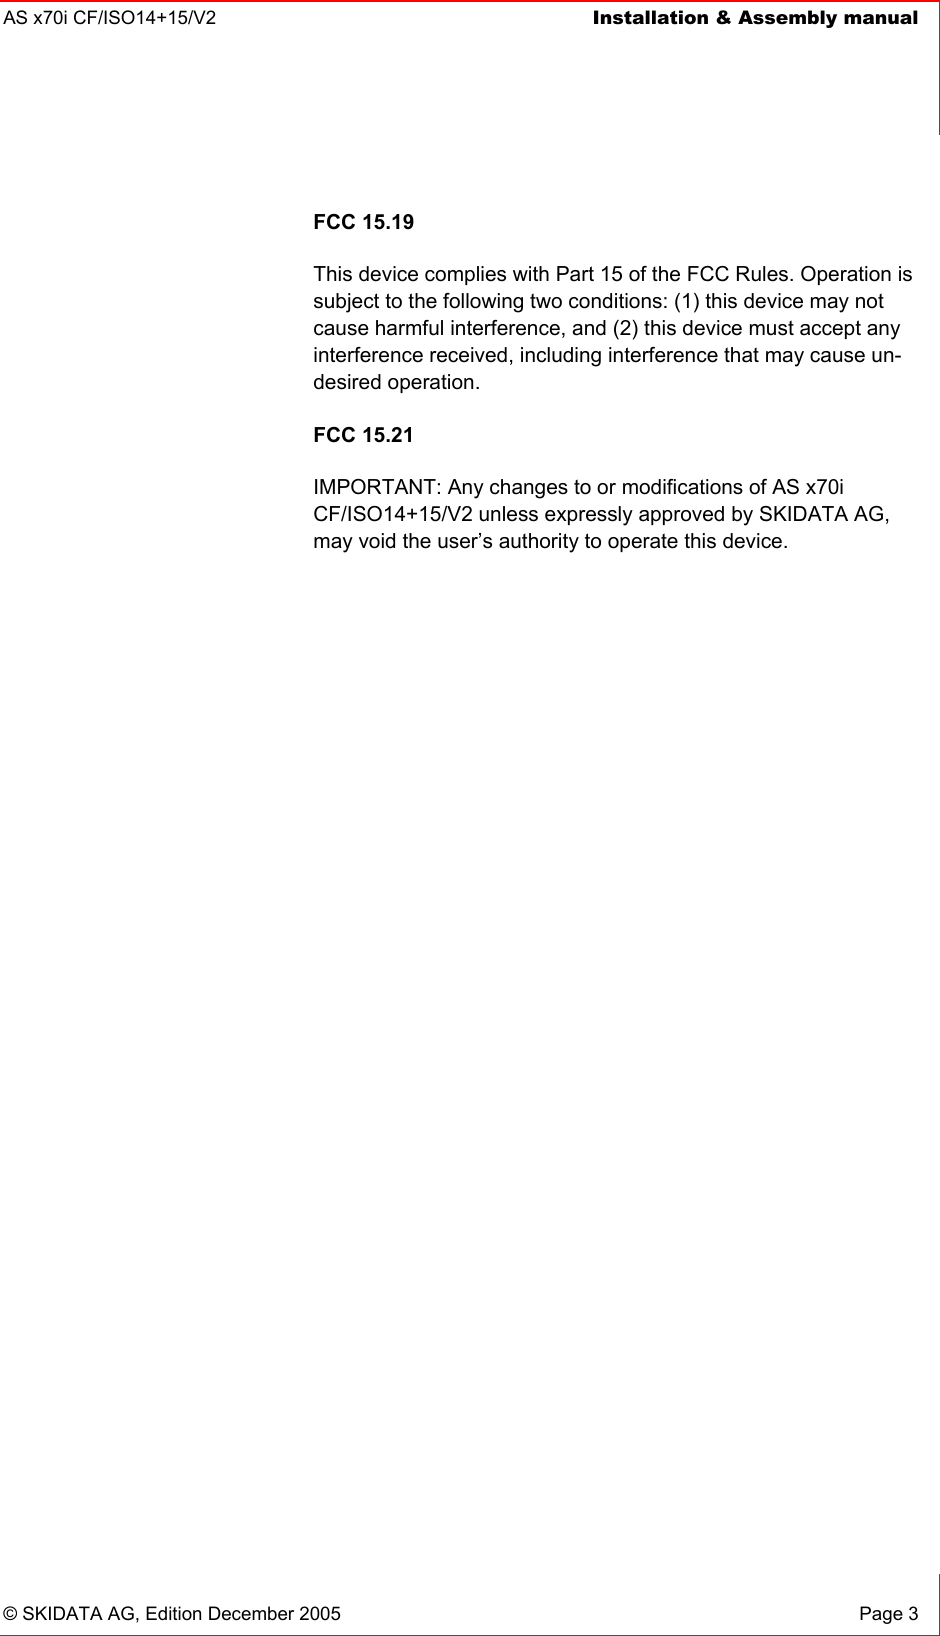 AS x70i CF/ISO14+15/V2  Installation &amp; Assembly manual    © SKIDATA AG, Edition December 2005  Page 3 FCC 15.19 This device complies with Part 15 of the FCC Rules. Operation is subject to the following two conditions: (1) this device may not cause harmful interference, and (2) this device must accept any interference received, including interference that may cause un-desired operation. FCC 15.21 IMPORTANT: Any changes to or modifications of AS x70i CF/ISO14+15/V2 unless expressly approved by SKIDATA AG, may void the user’s authority to operate this device.  